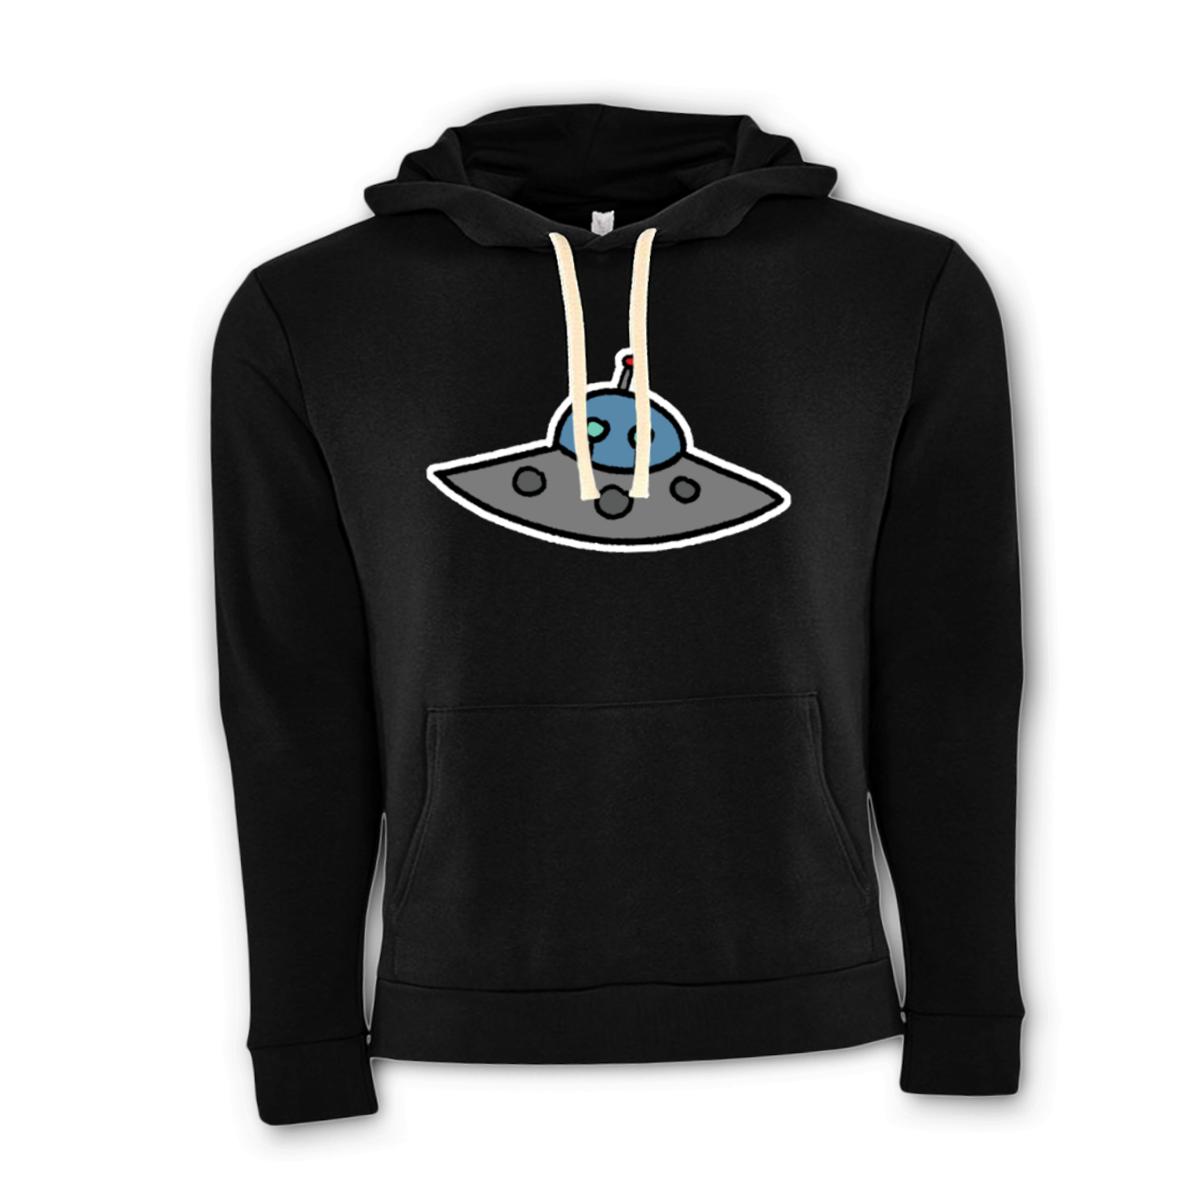 Flying Saucer Unisex Pullover Hoodie Small black